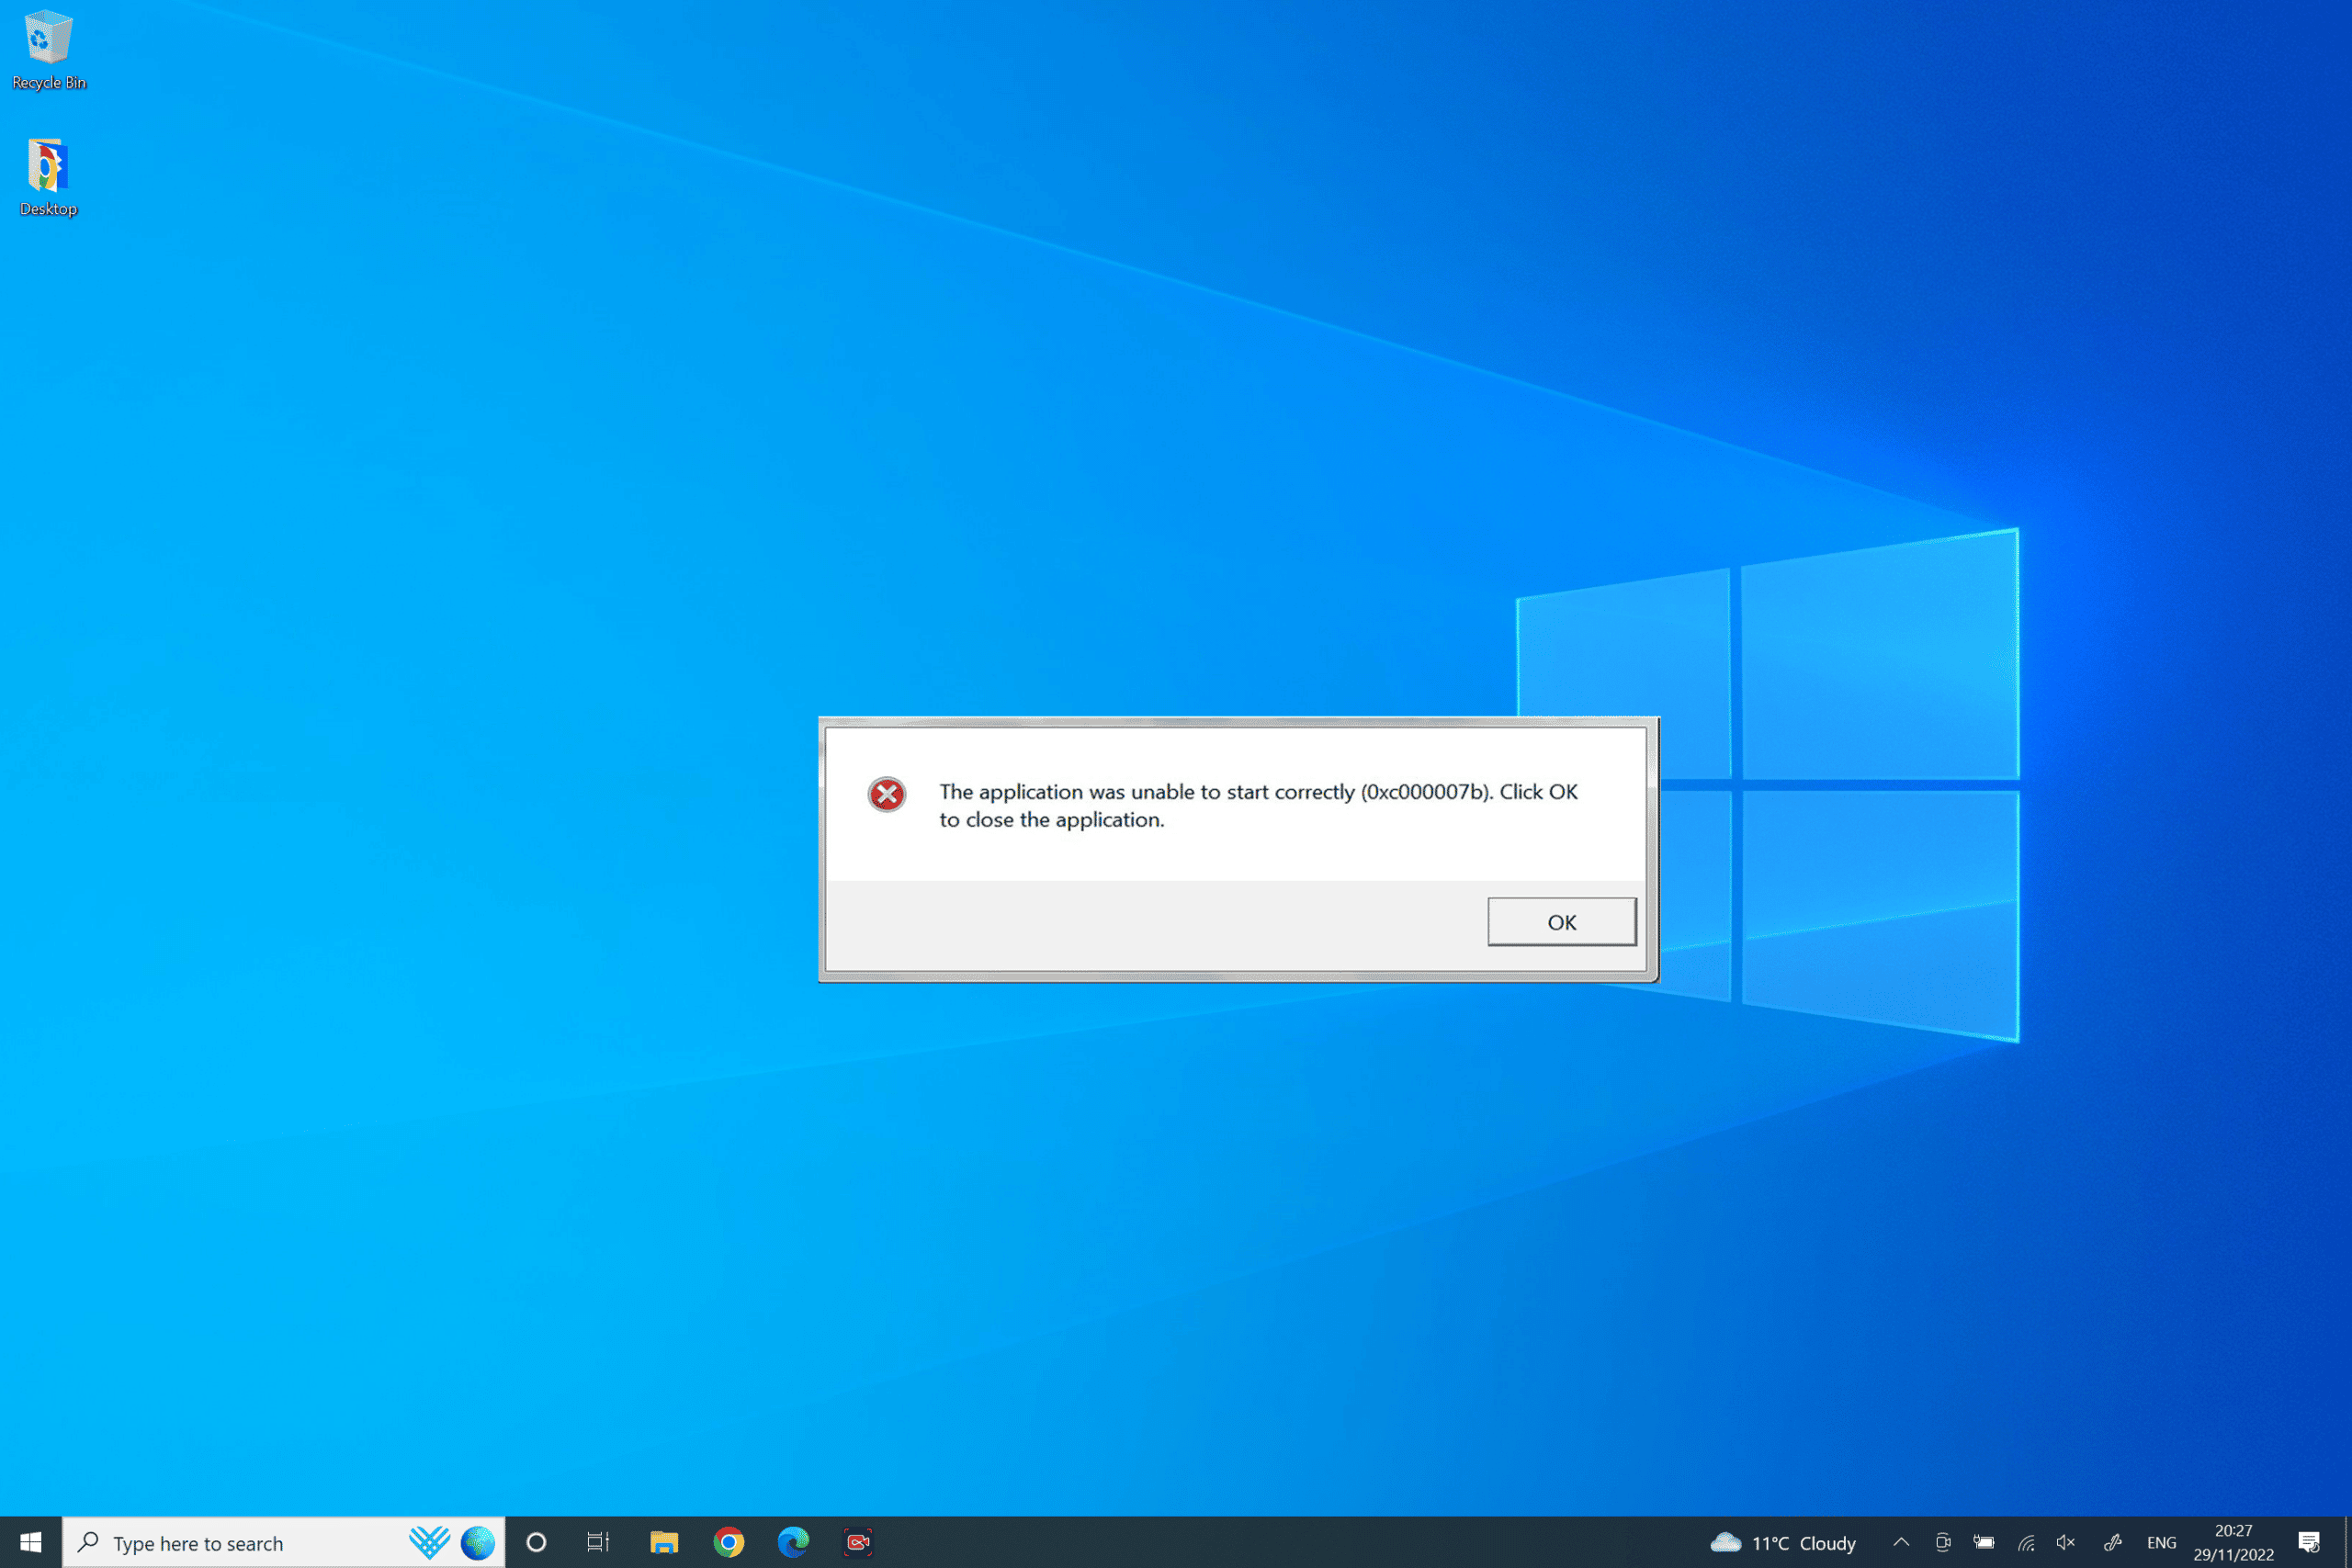 Fix The Application Was Unable to Start (0xc000007b) in Windows